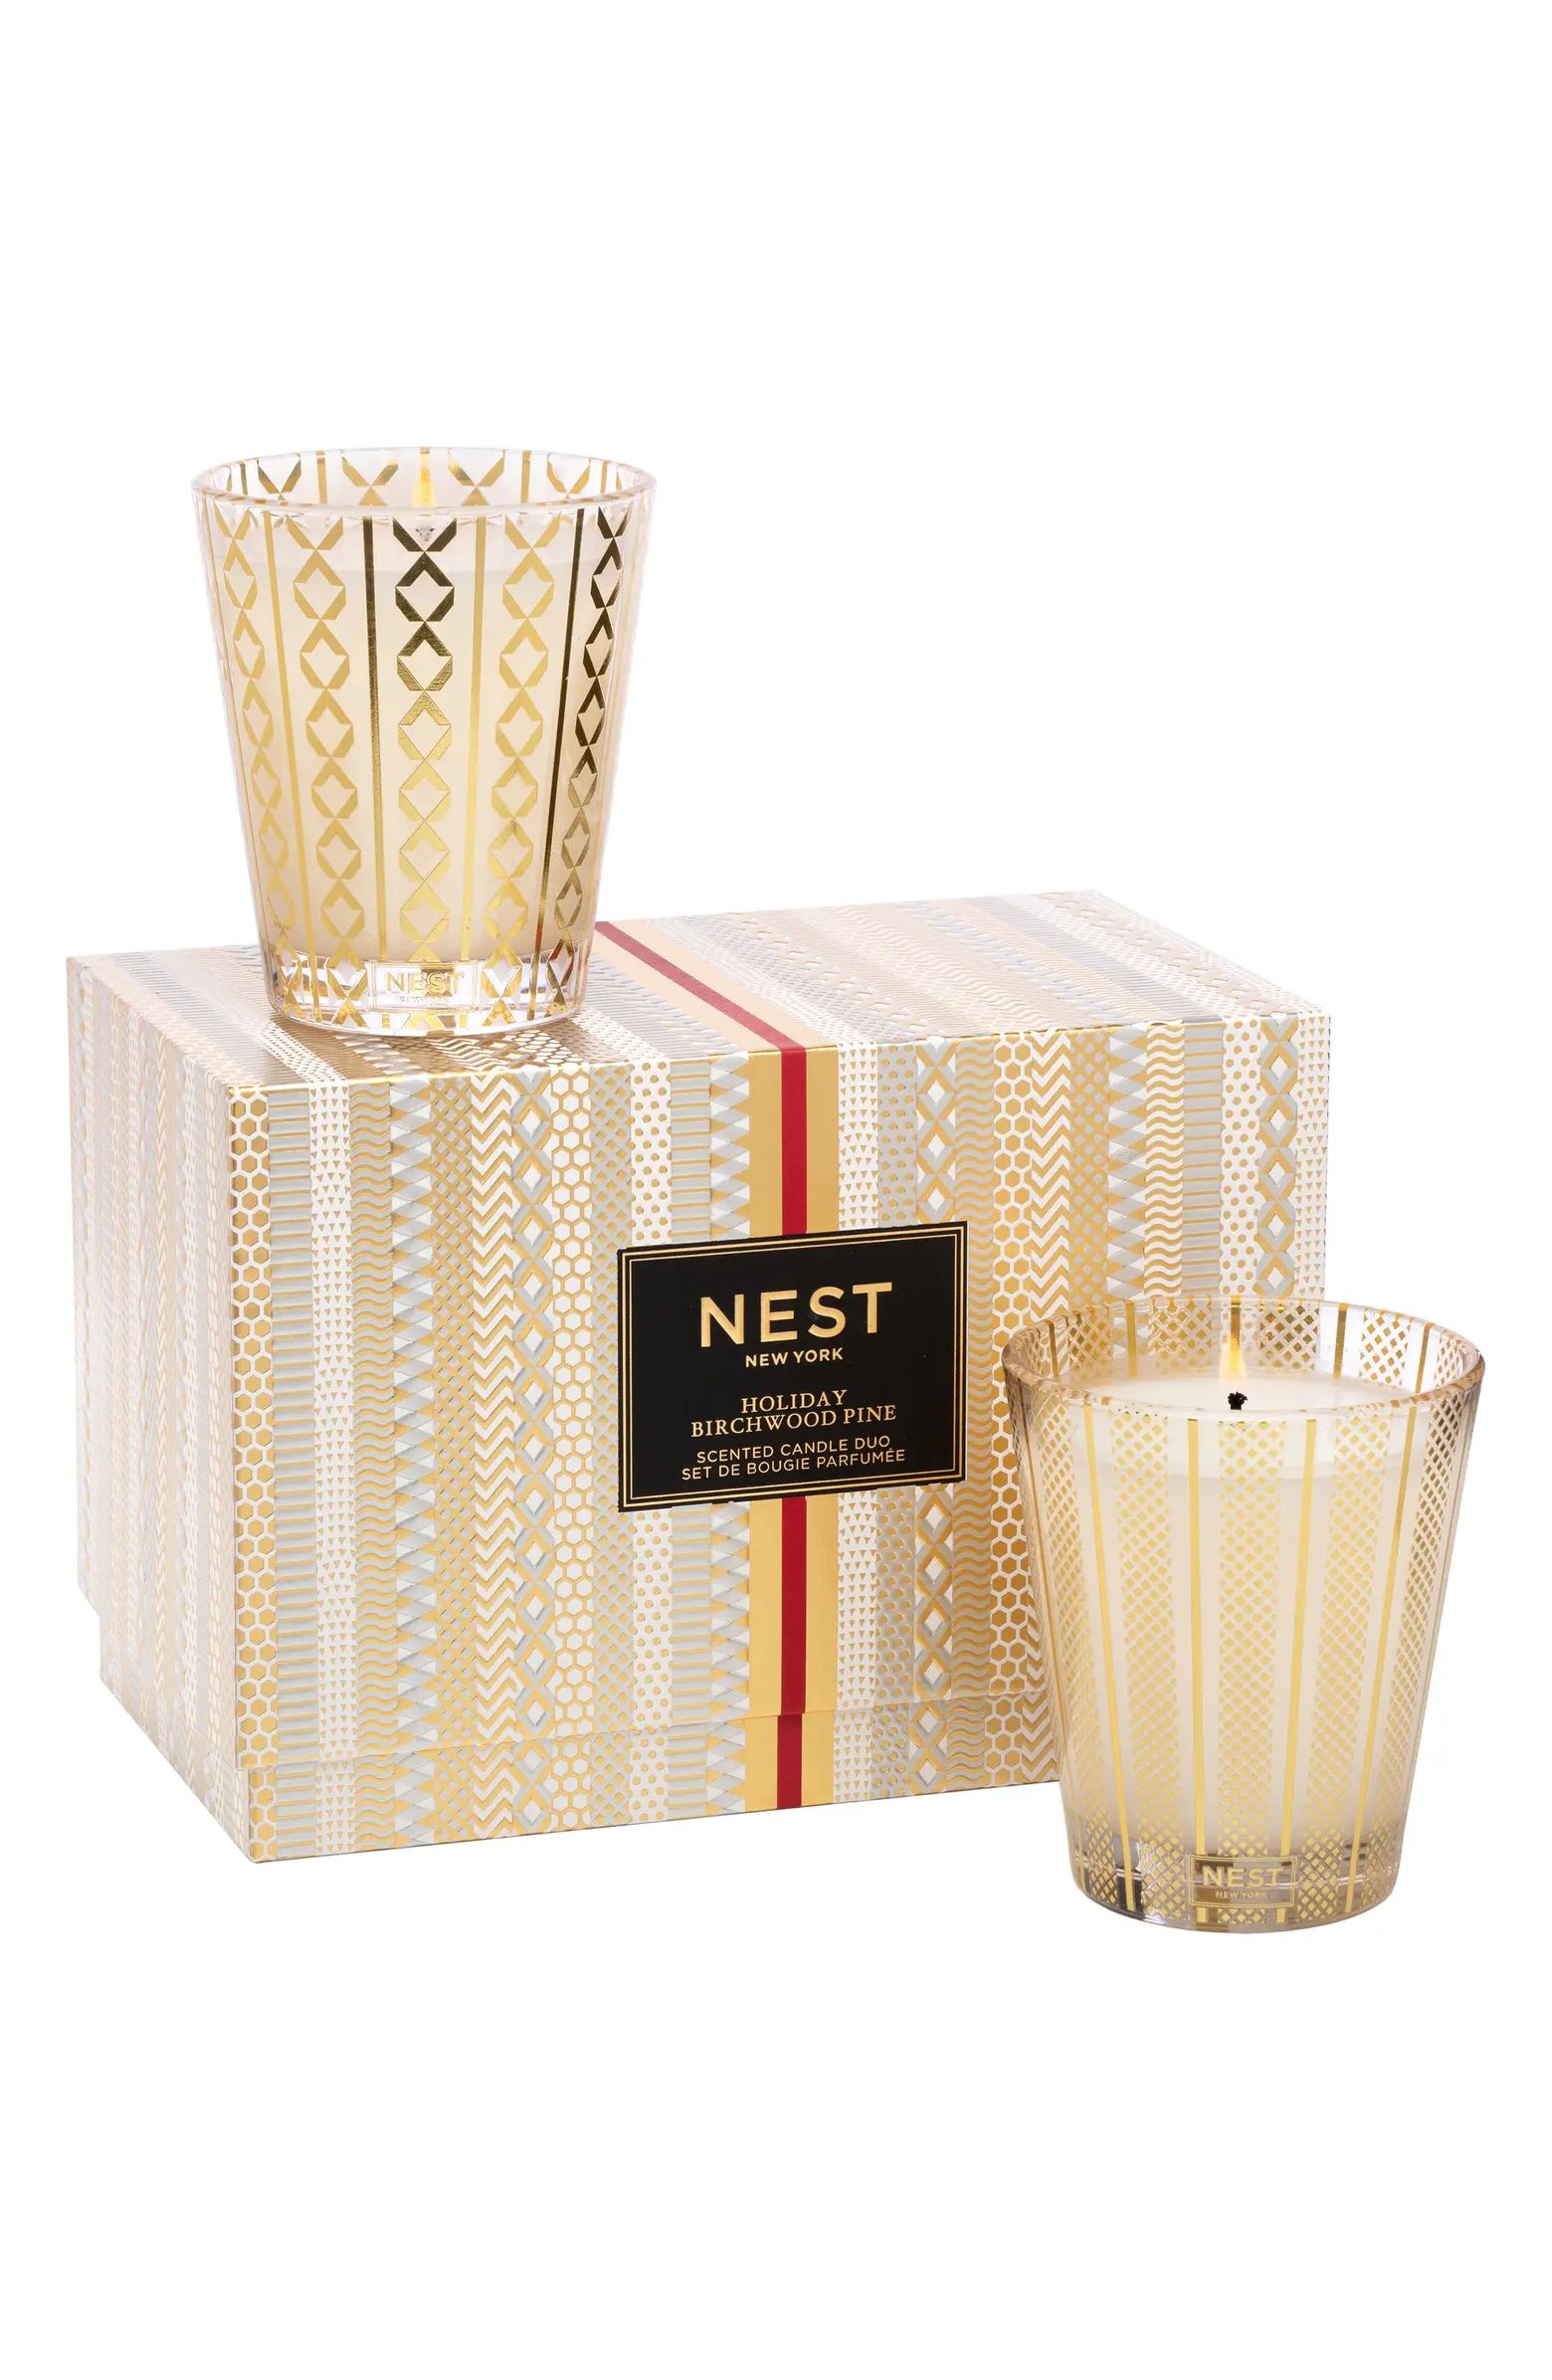 Holiday & Birchwood Pine Scented Candle Set | Nordstrom